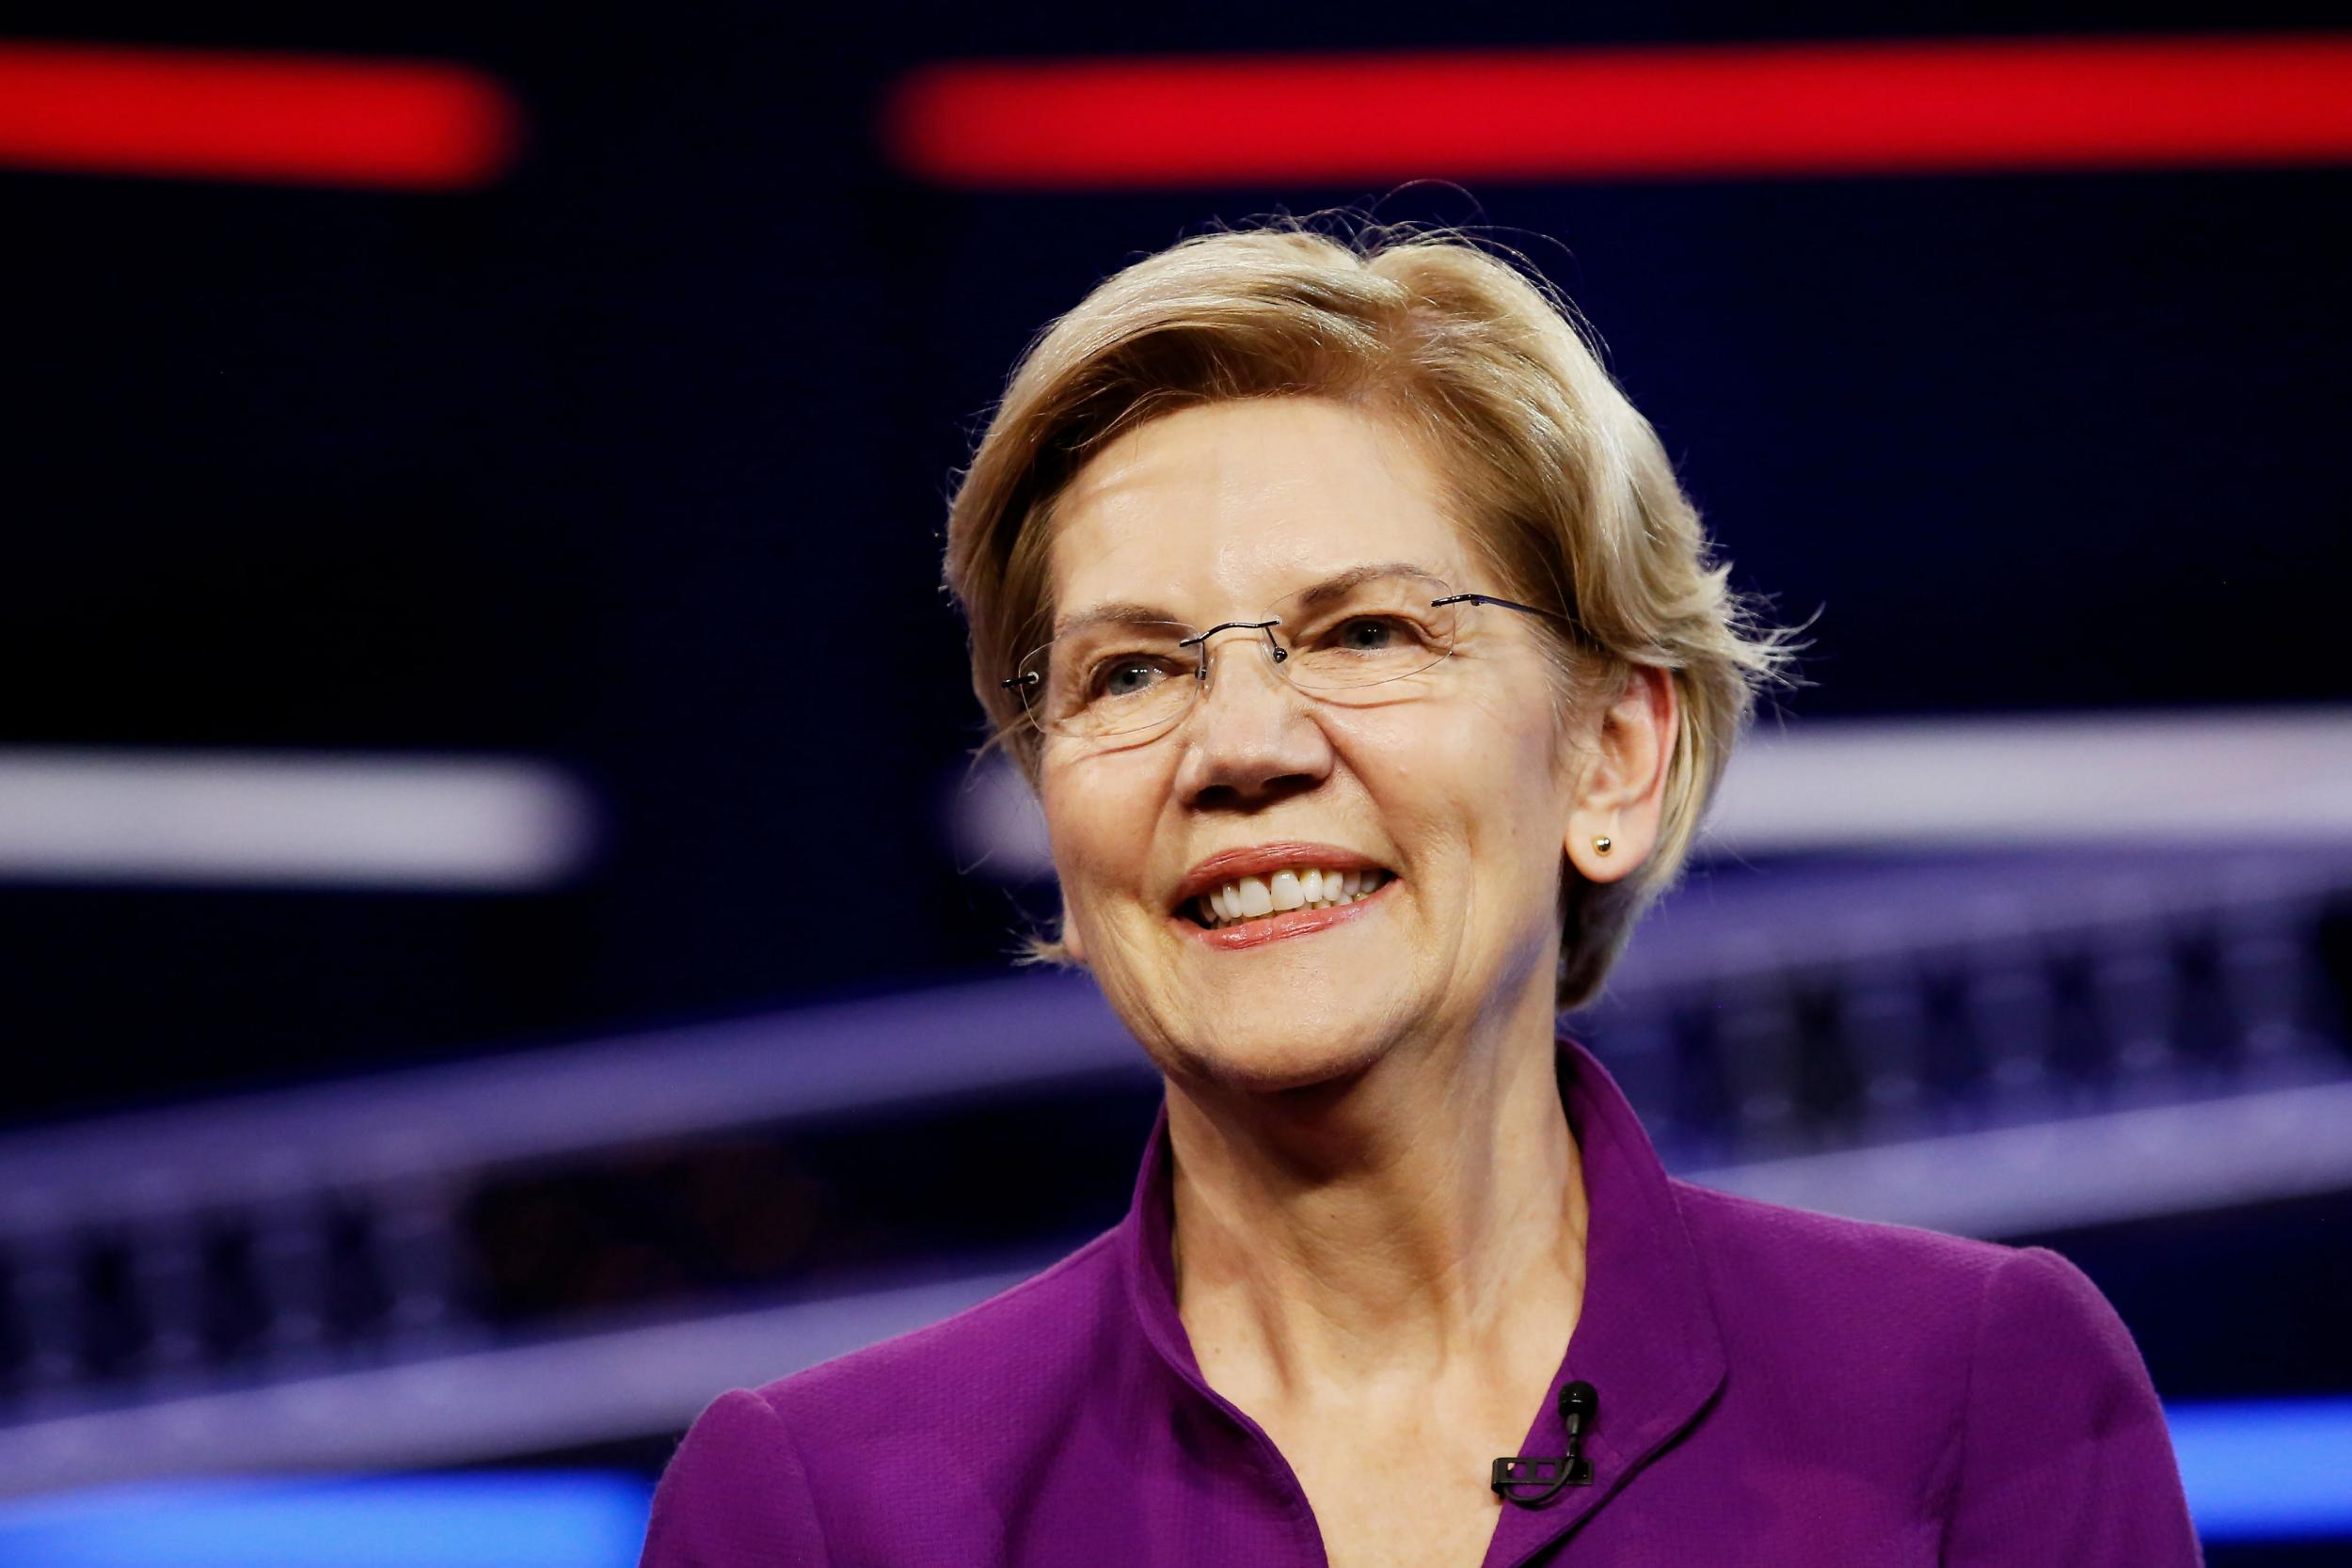 Elizabeth Warren and Bill deBlasio were the only two who spoke at length about healthcare at the first Democratic debate on Wednesday